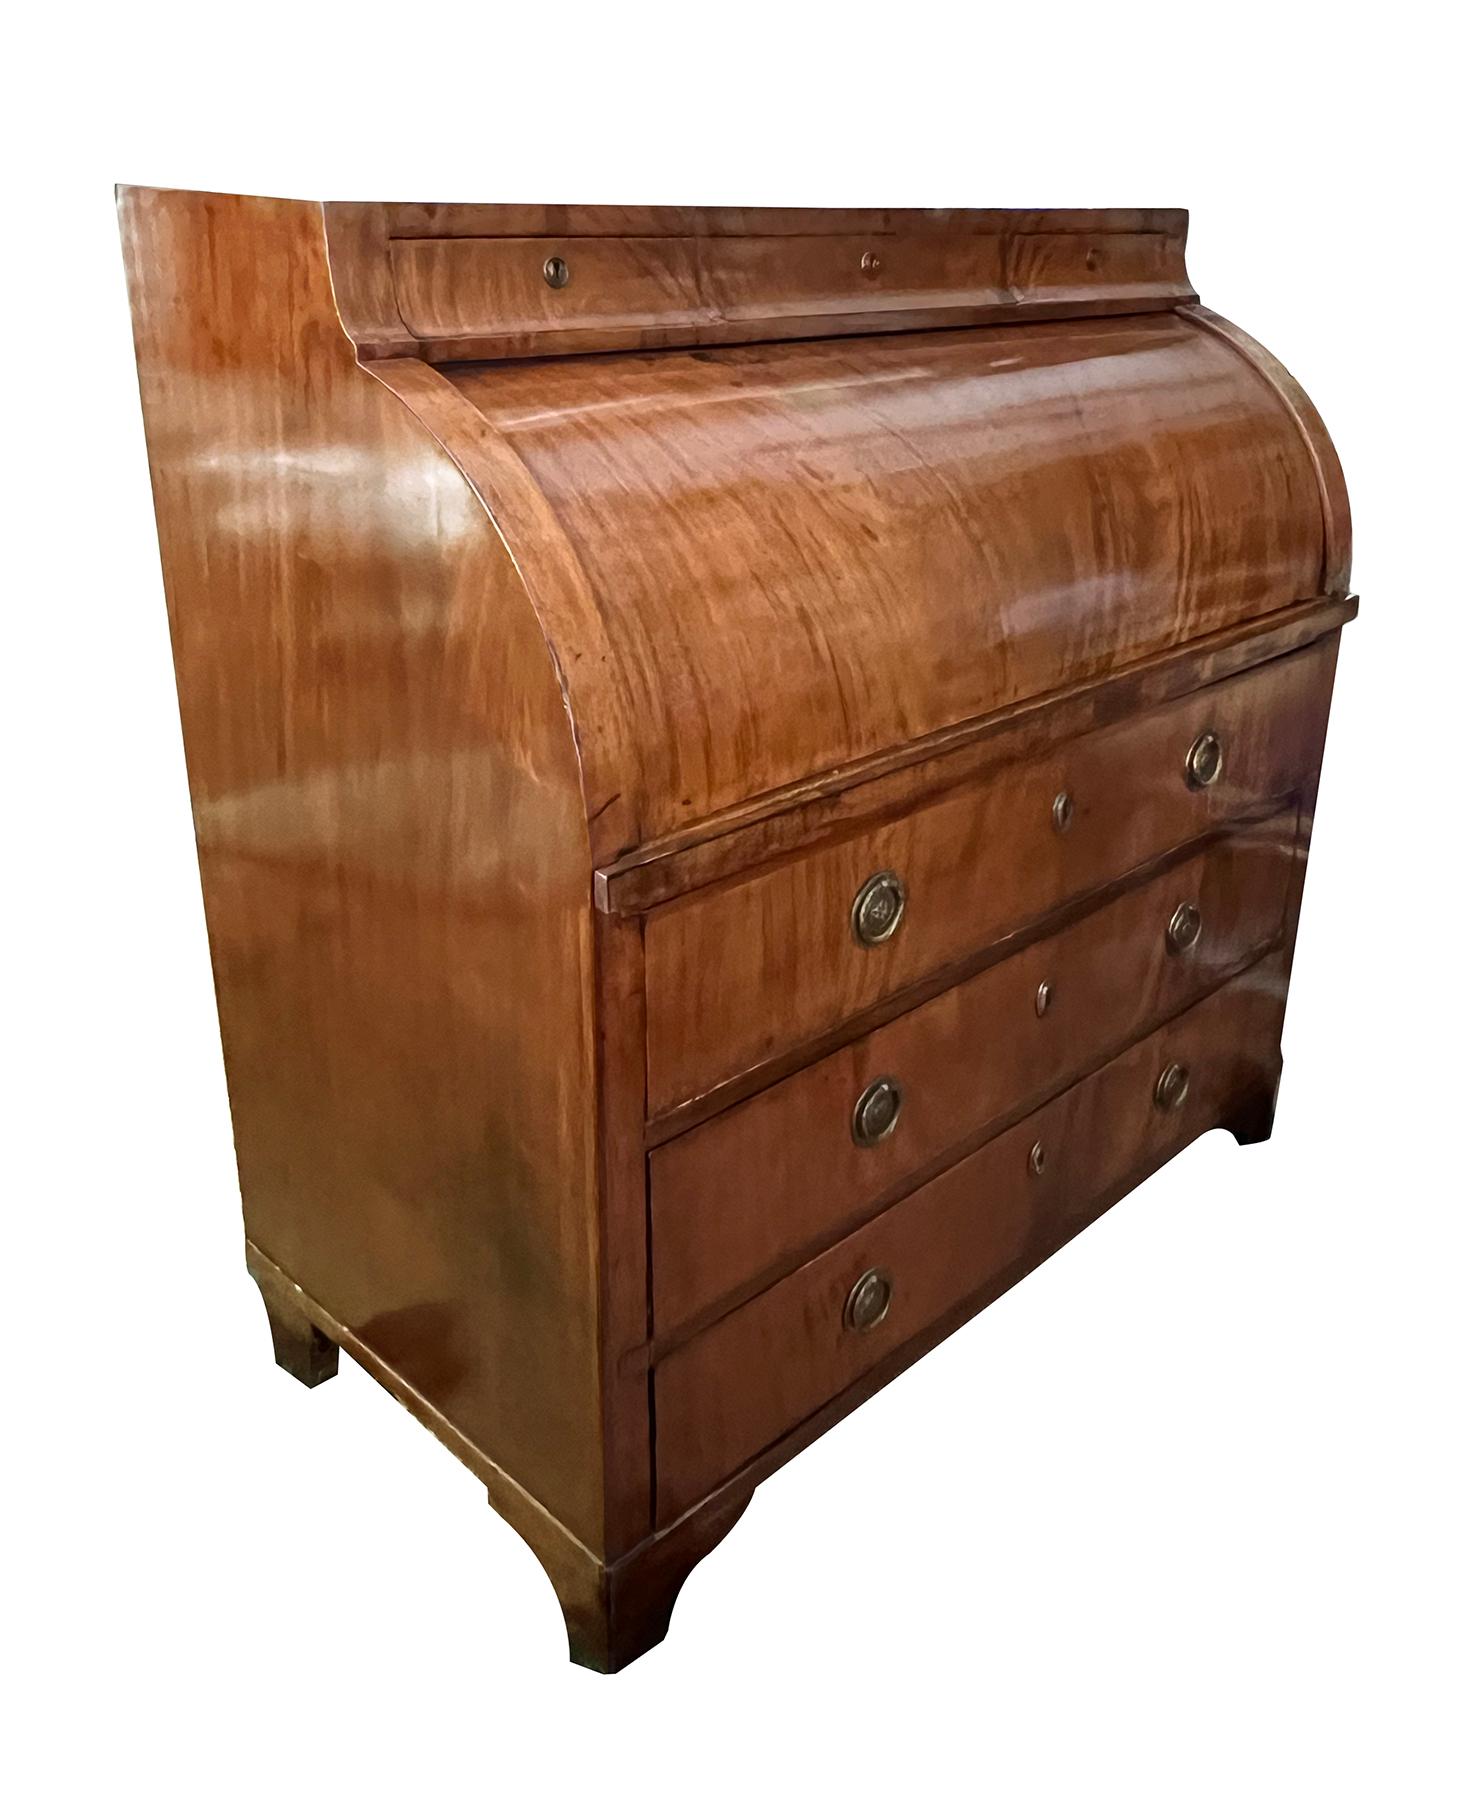 A good north Germany (possibly Hamburg) Biedermeier Cylinder Bureau overall of beautifully figured mahogany veneers; as the writing surface is pulled outward the cylinder top opens to reveal various burlwood drawers and a central arched compartment